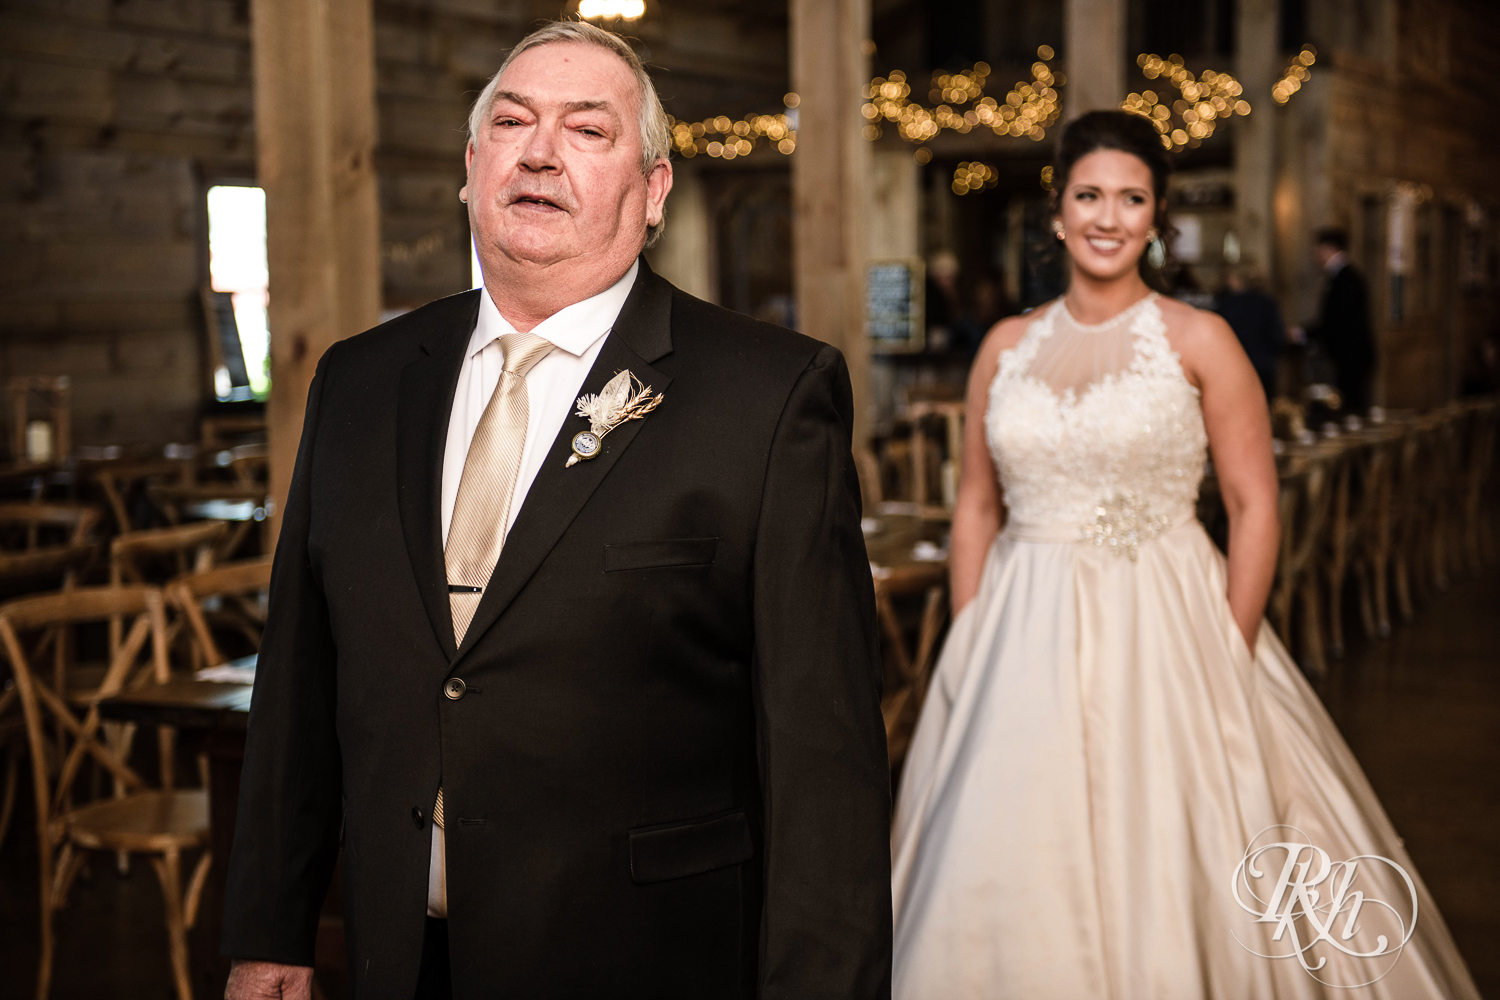 Bride does first look with her dad before wedding at Creekside Farm in Rush City, Minnesota.